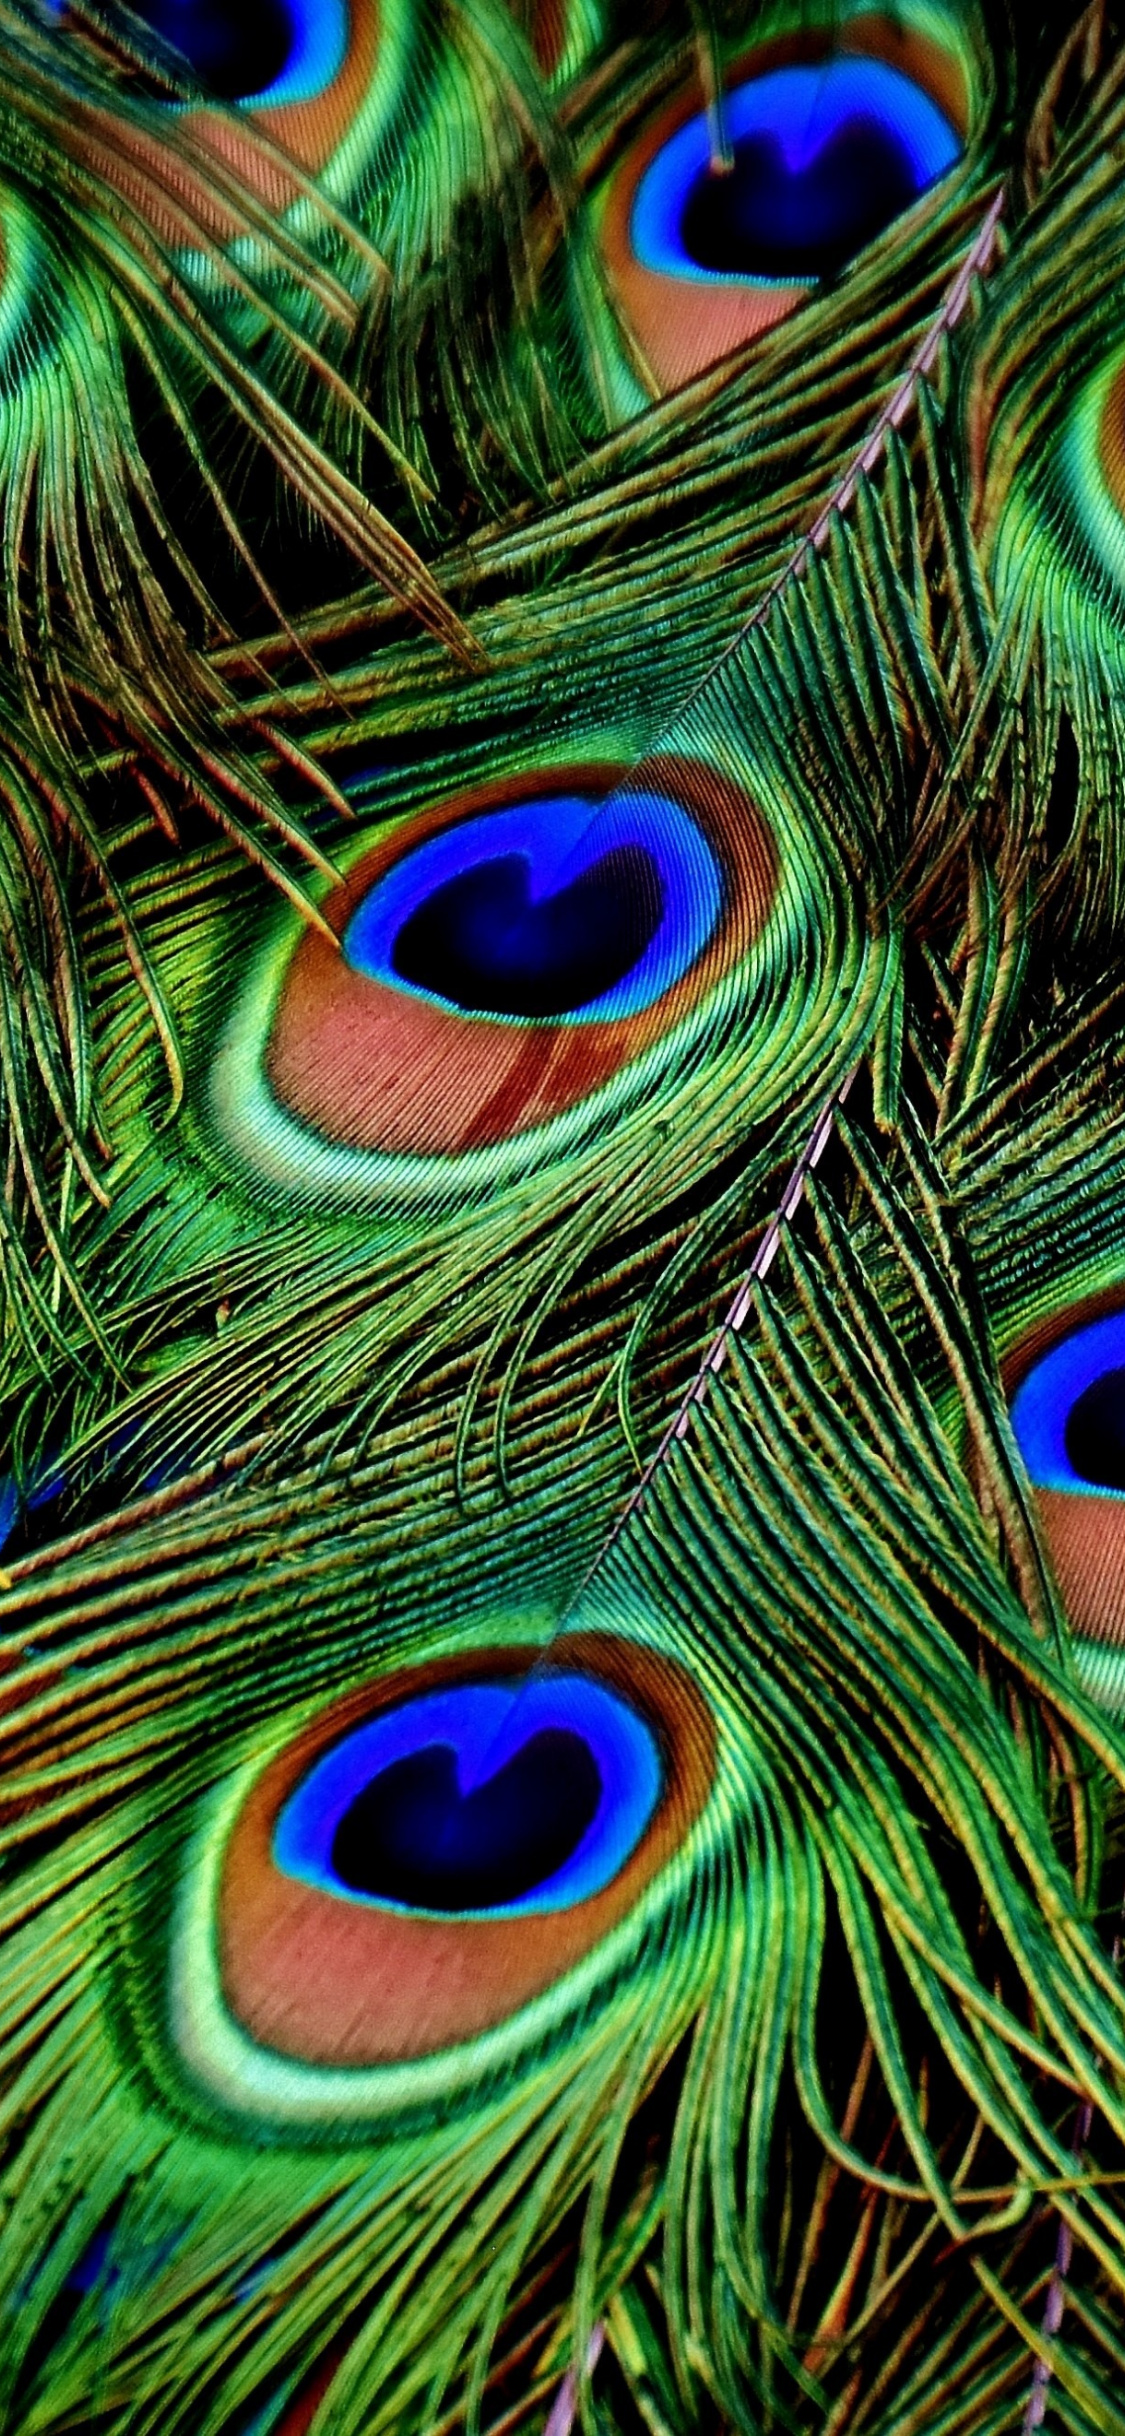 Peacock, Feathers, Colorful, Plumage, Wallpaper - Full Hd Peacock Feather Wallpaper For Mobile - HD Wallpaper 